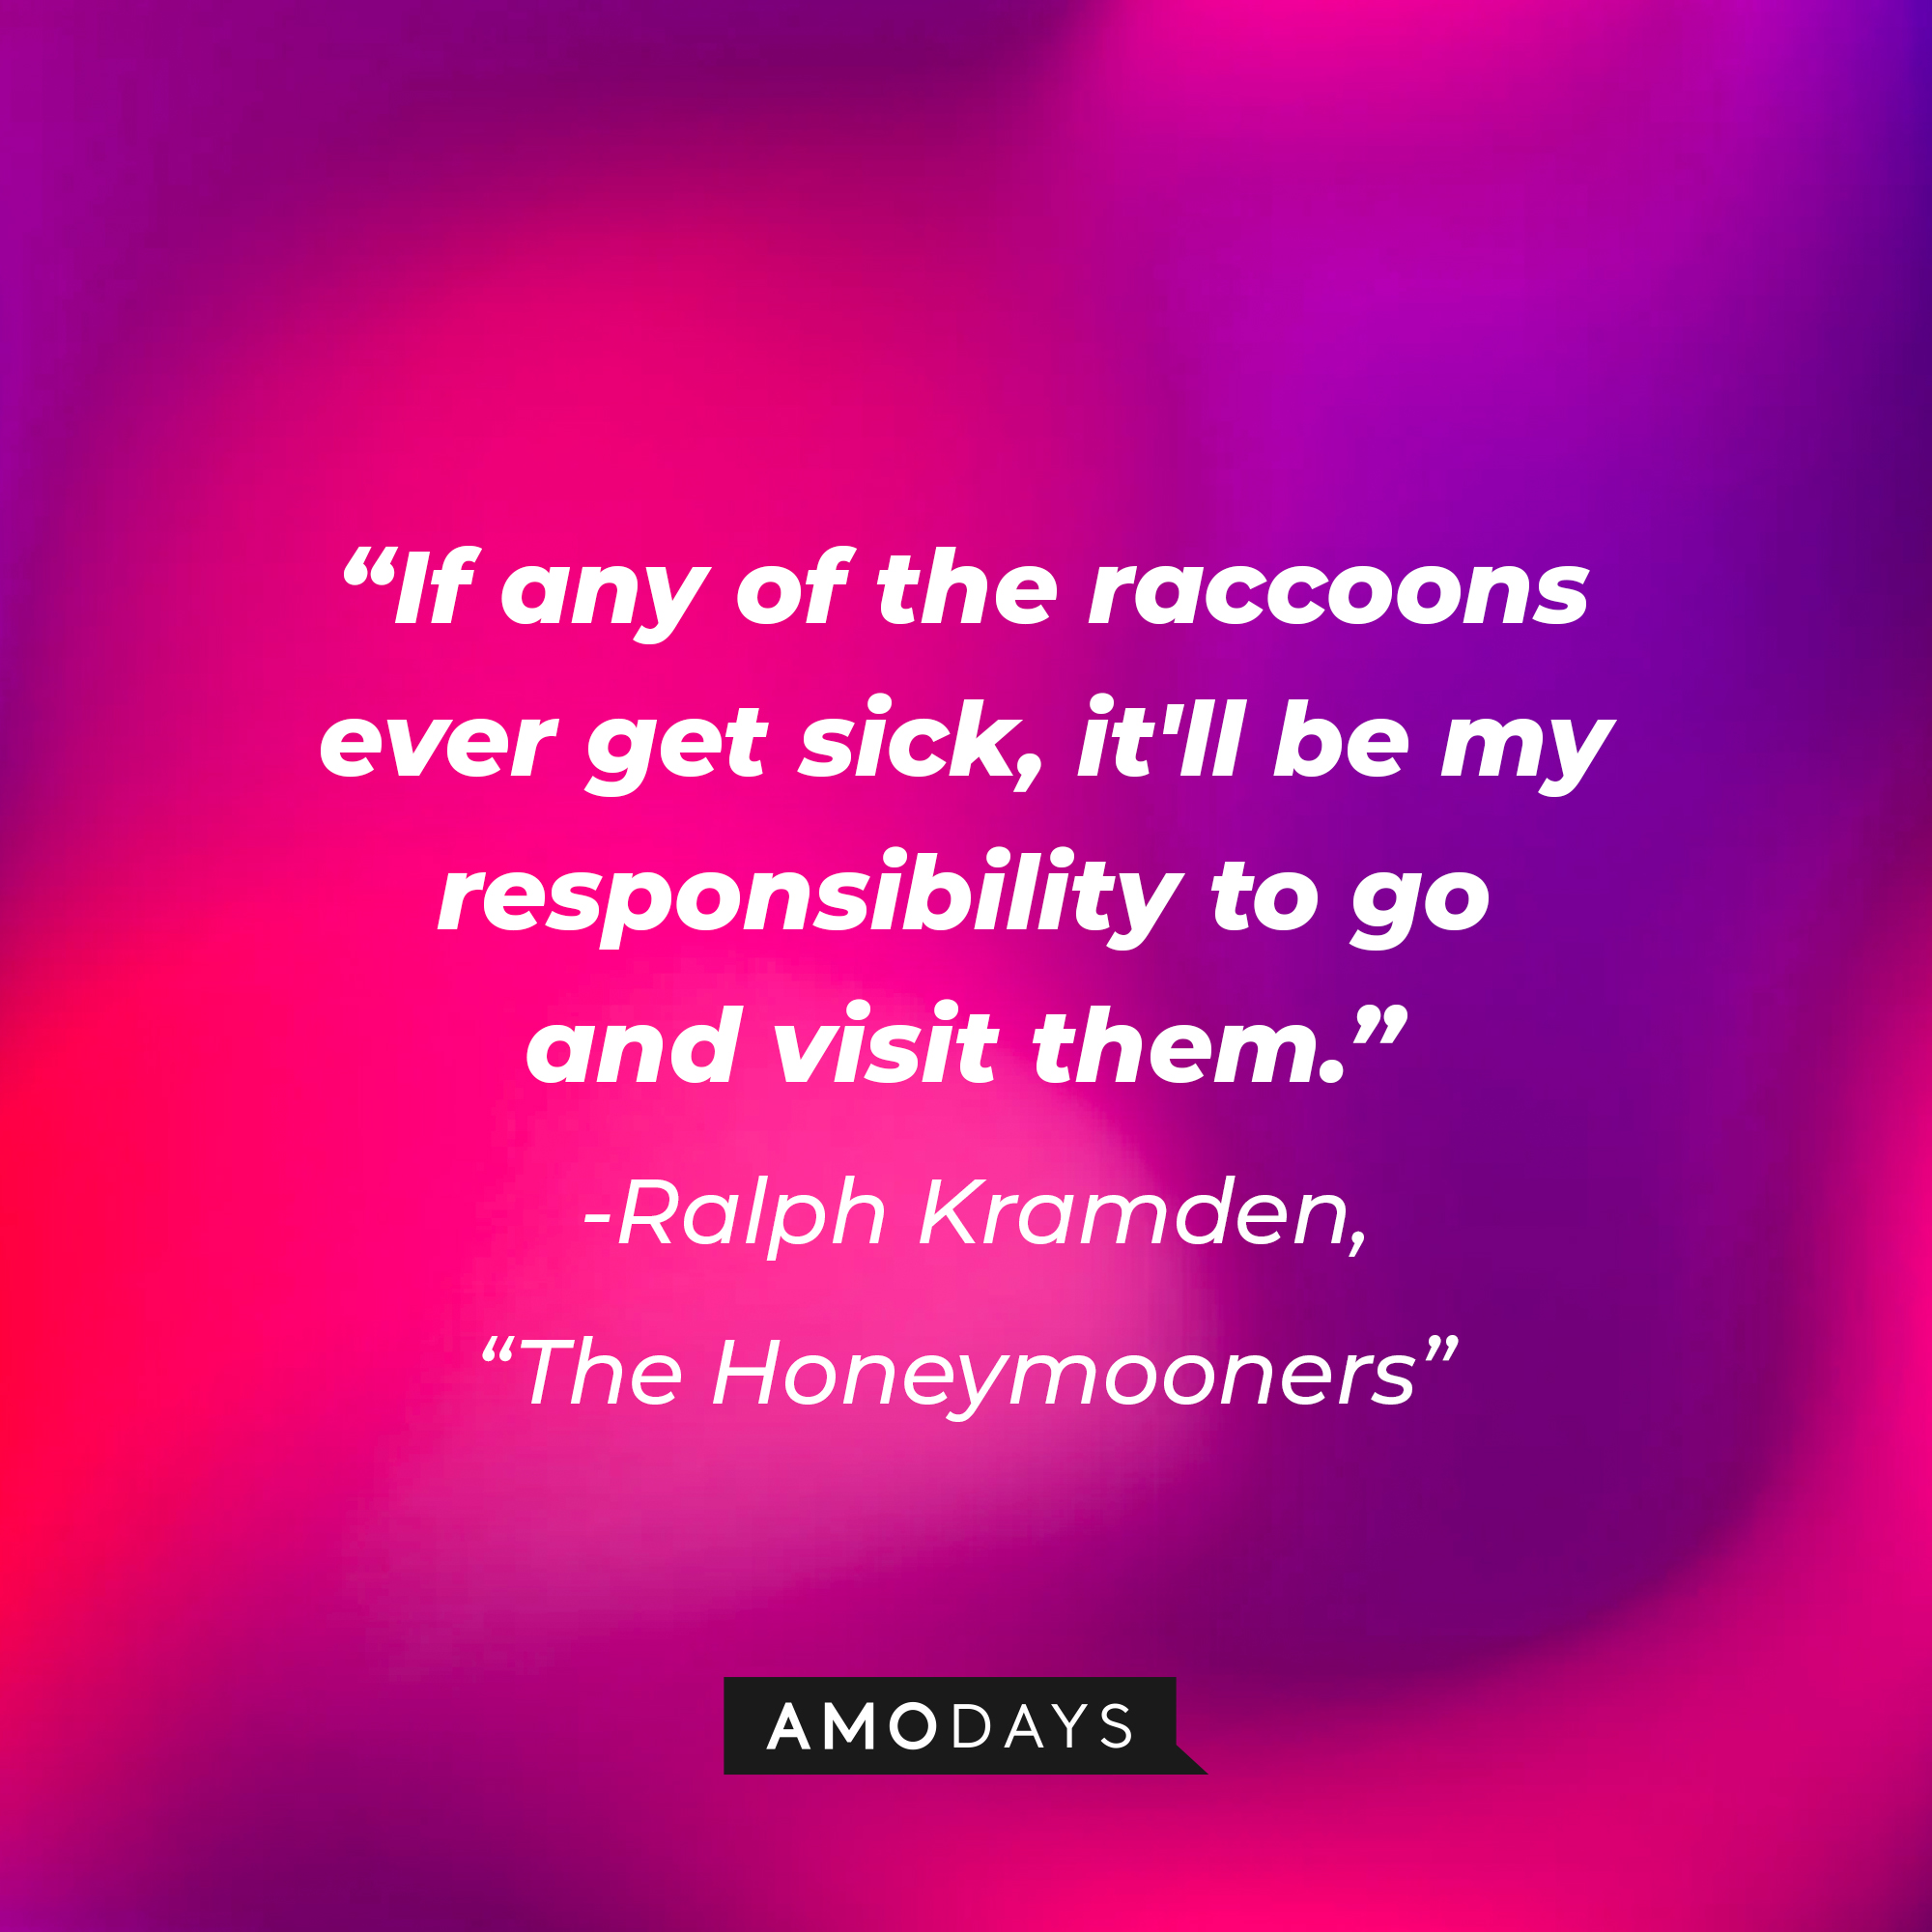 A quote from "The Honeymooners" star Ralph Kramden: "If any of the raccoons ever get sick, it'll be my responsibility to go and visit them." | Source: AmoDays